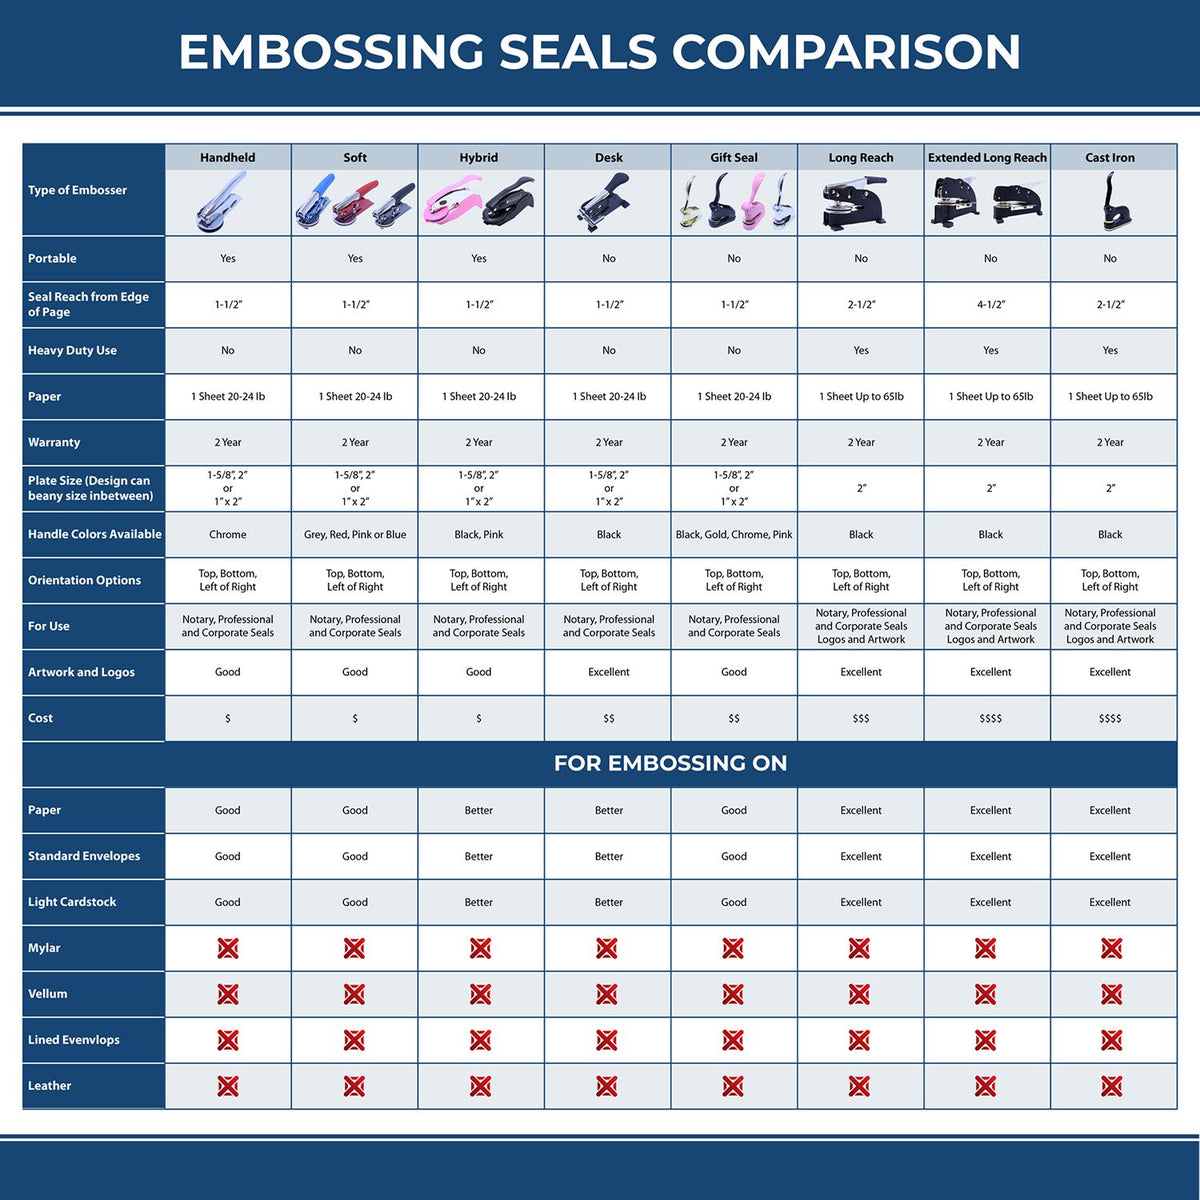 A comparison chart for the different types of mount models available for the Heavy Duty Cast Iron Maryland Architect Embosser.